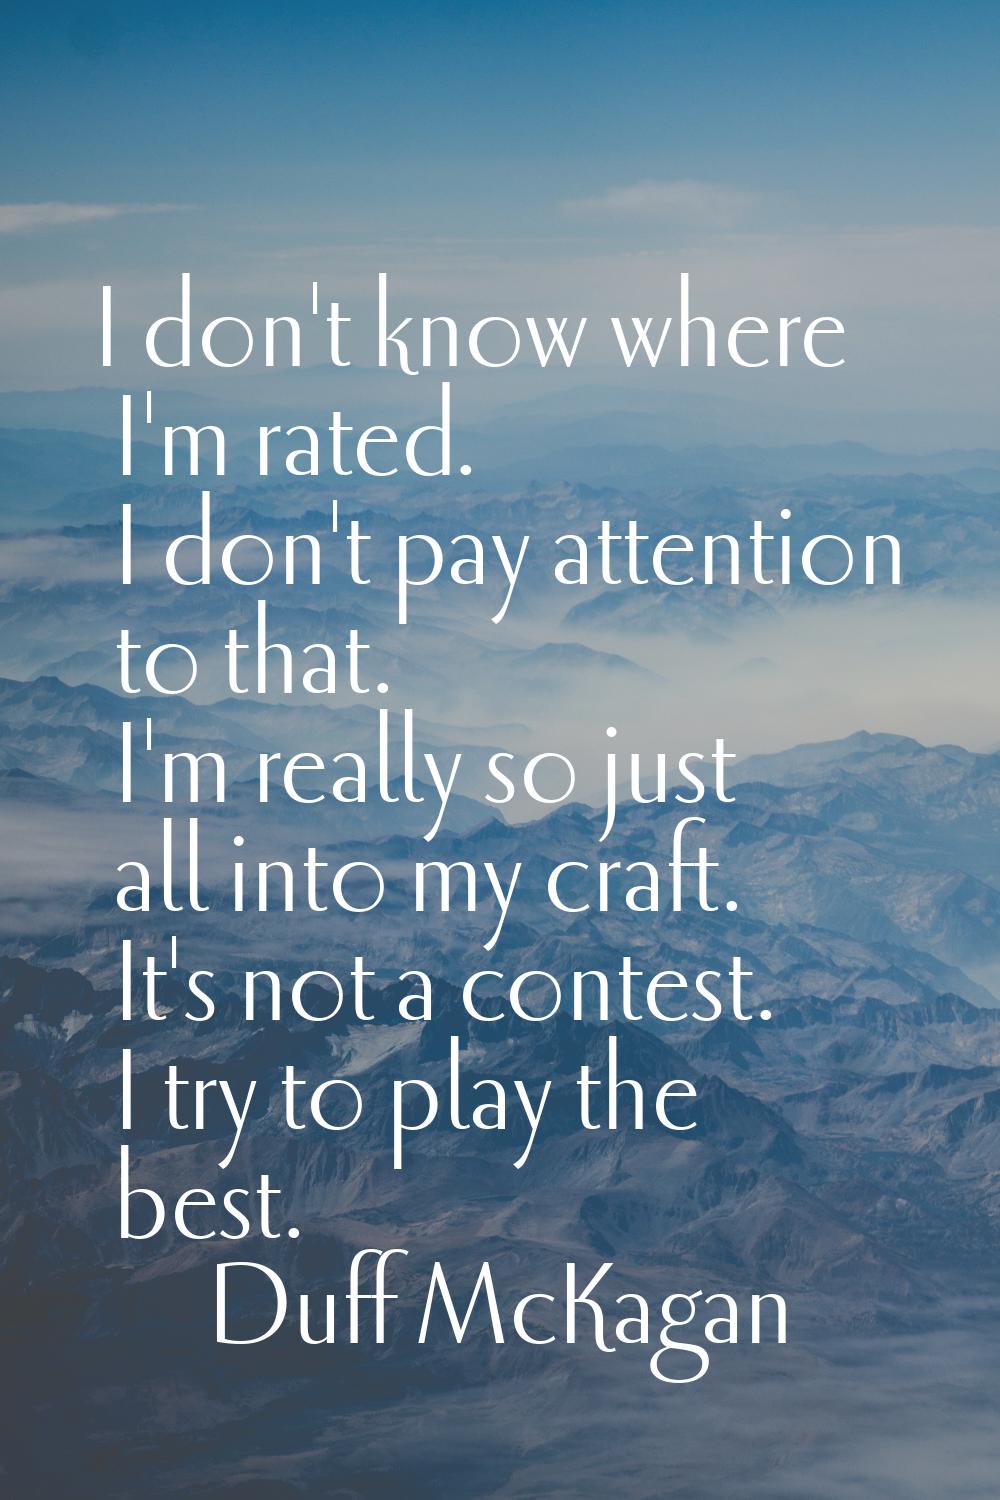 I don't know where I'm rated. I don't pay attention to that. I'm really so just all into my craft. 